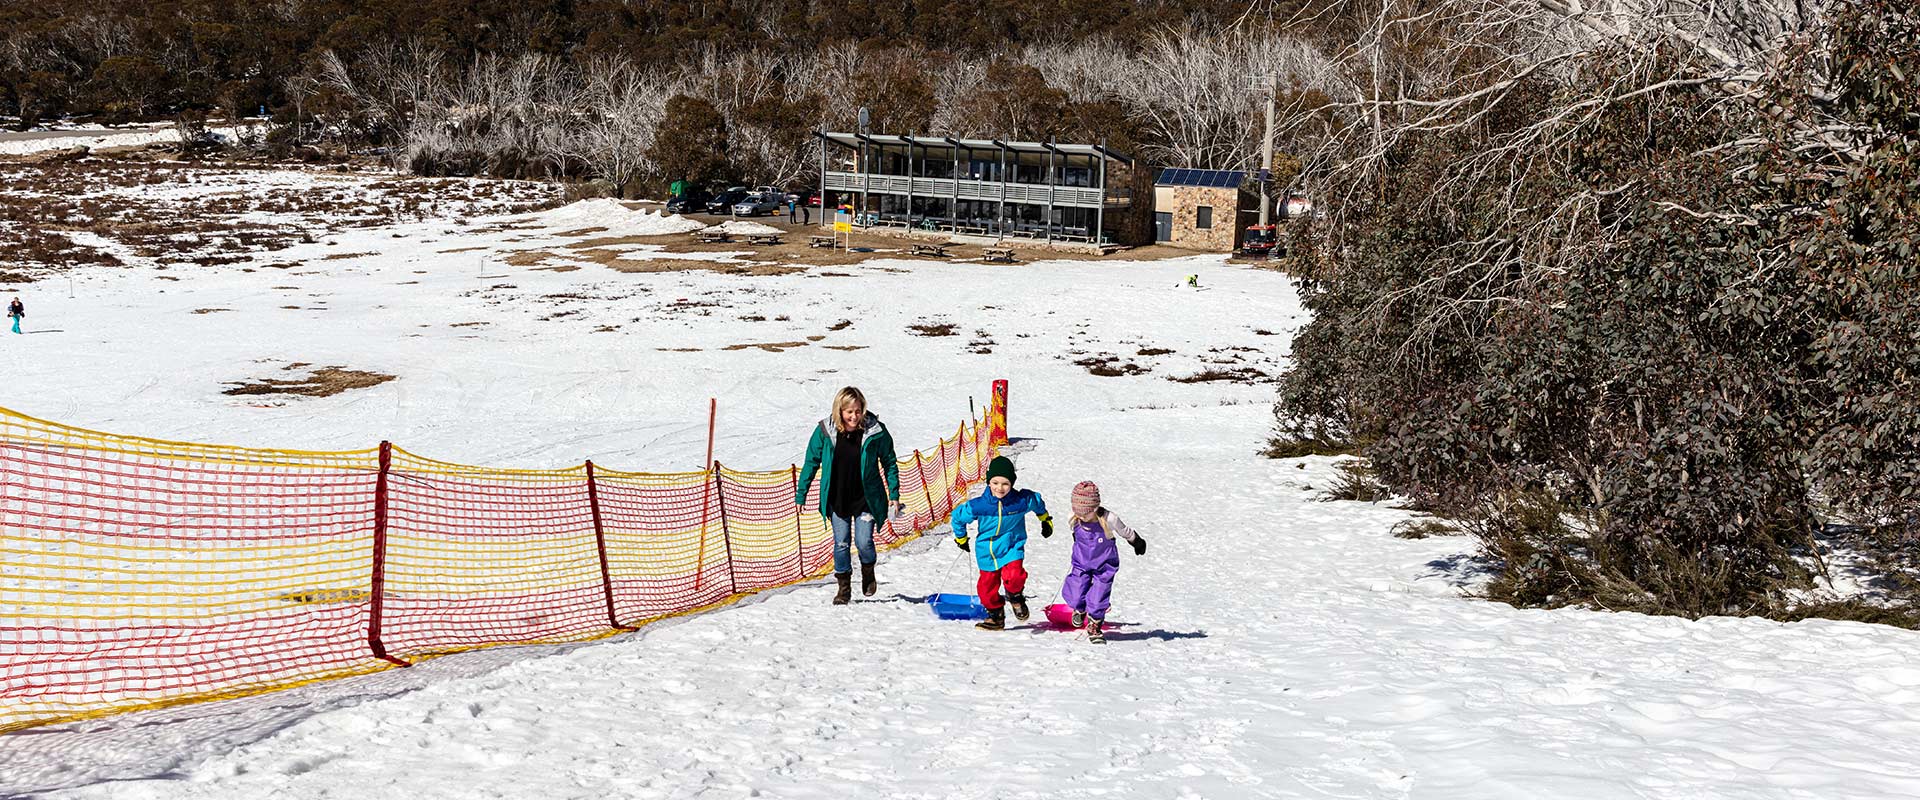 Two young children and their mother head up a gentle snow-cover slope carrying a toboggan